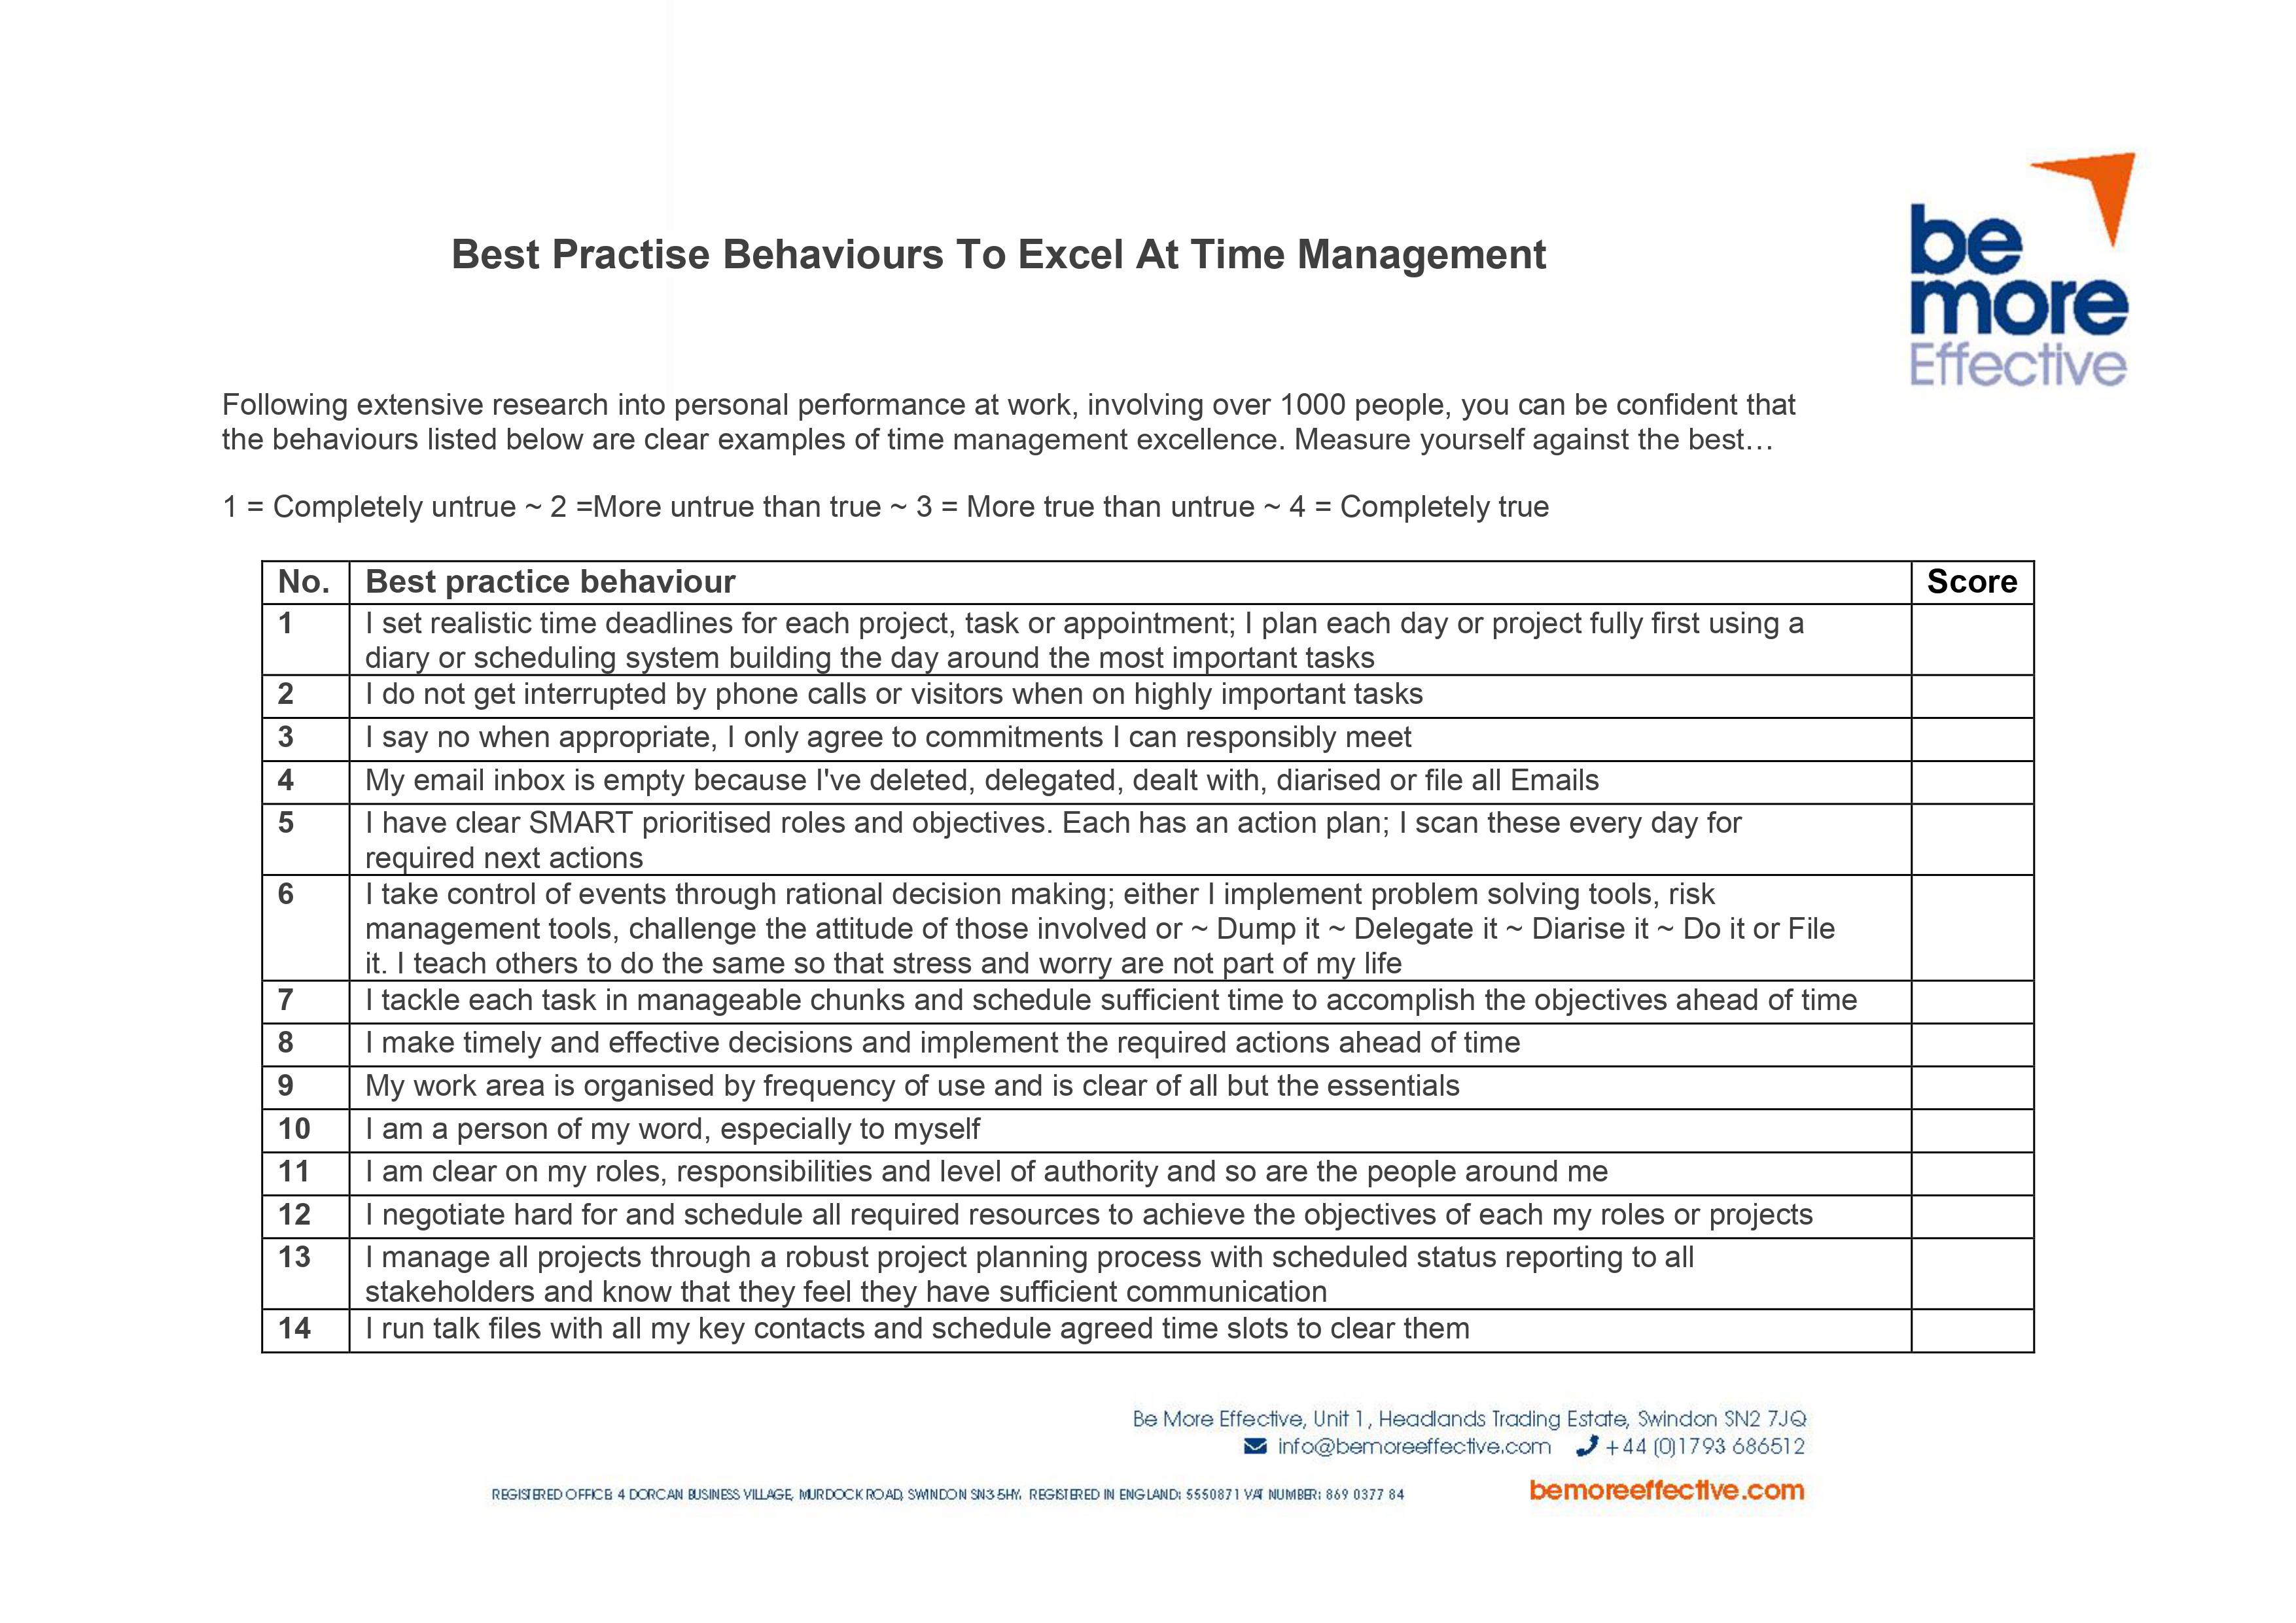 Best practise behaviours to excel at time management